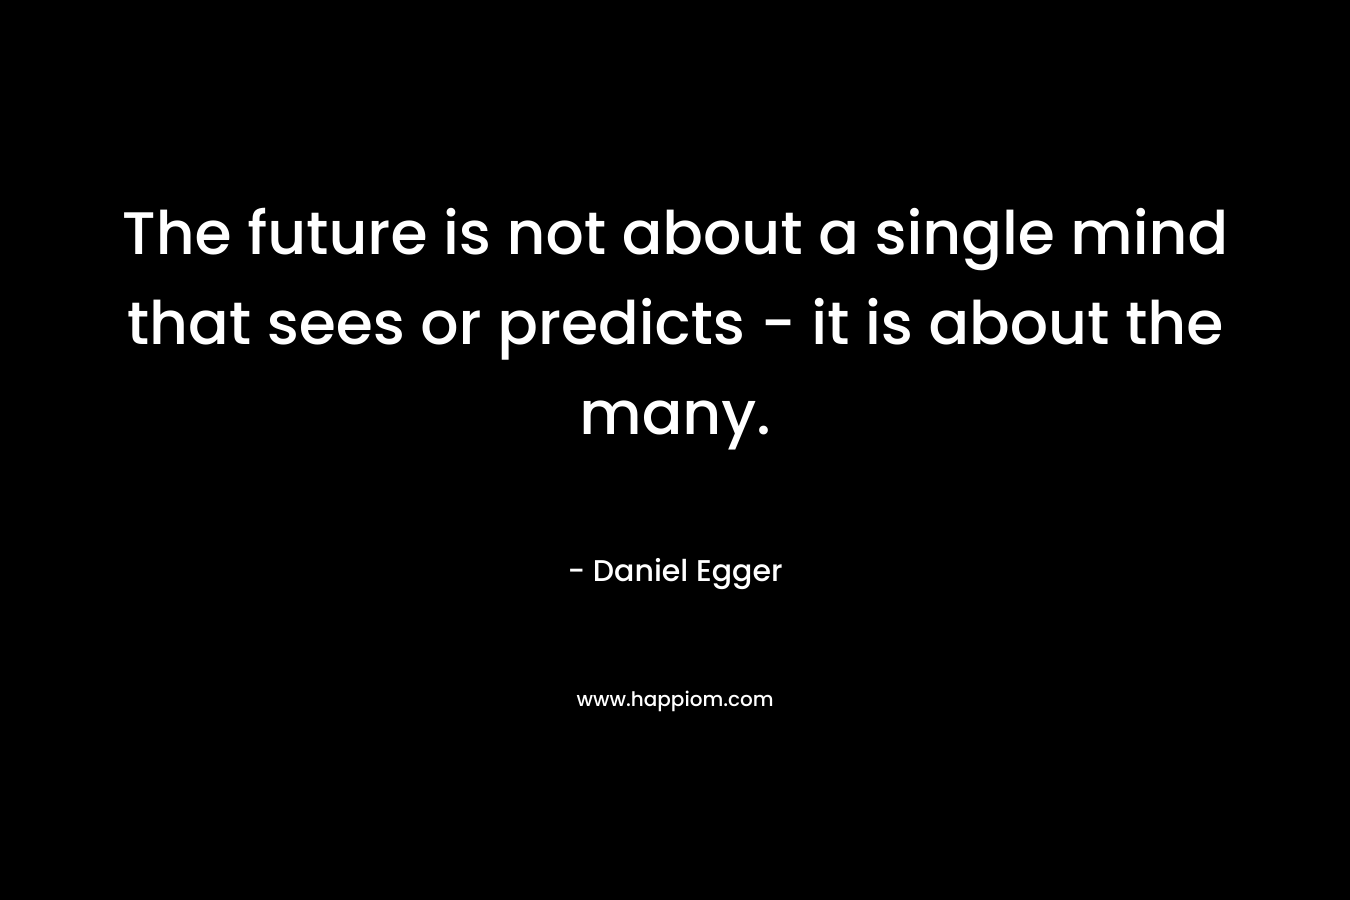 The future is not about a single mind that sees or predicts – it is about the many. – Daniel Egger